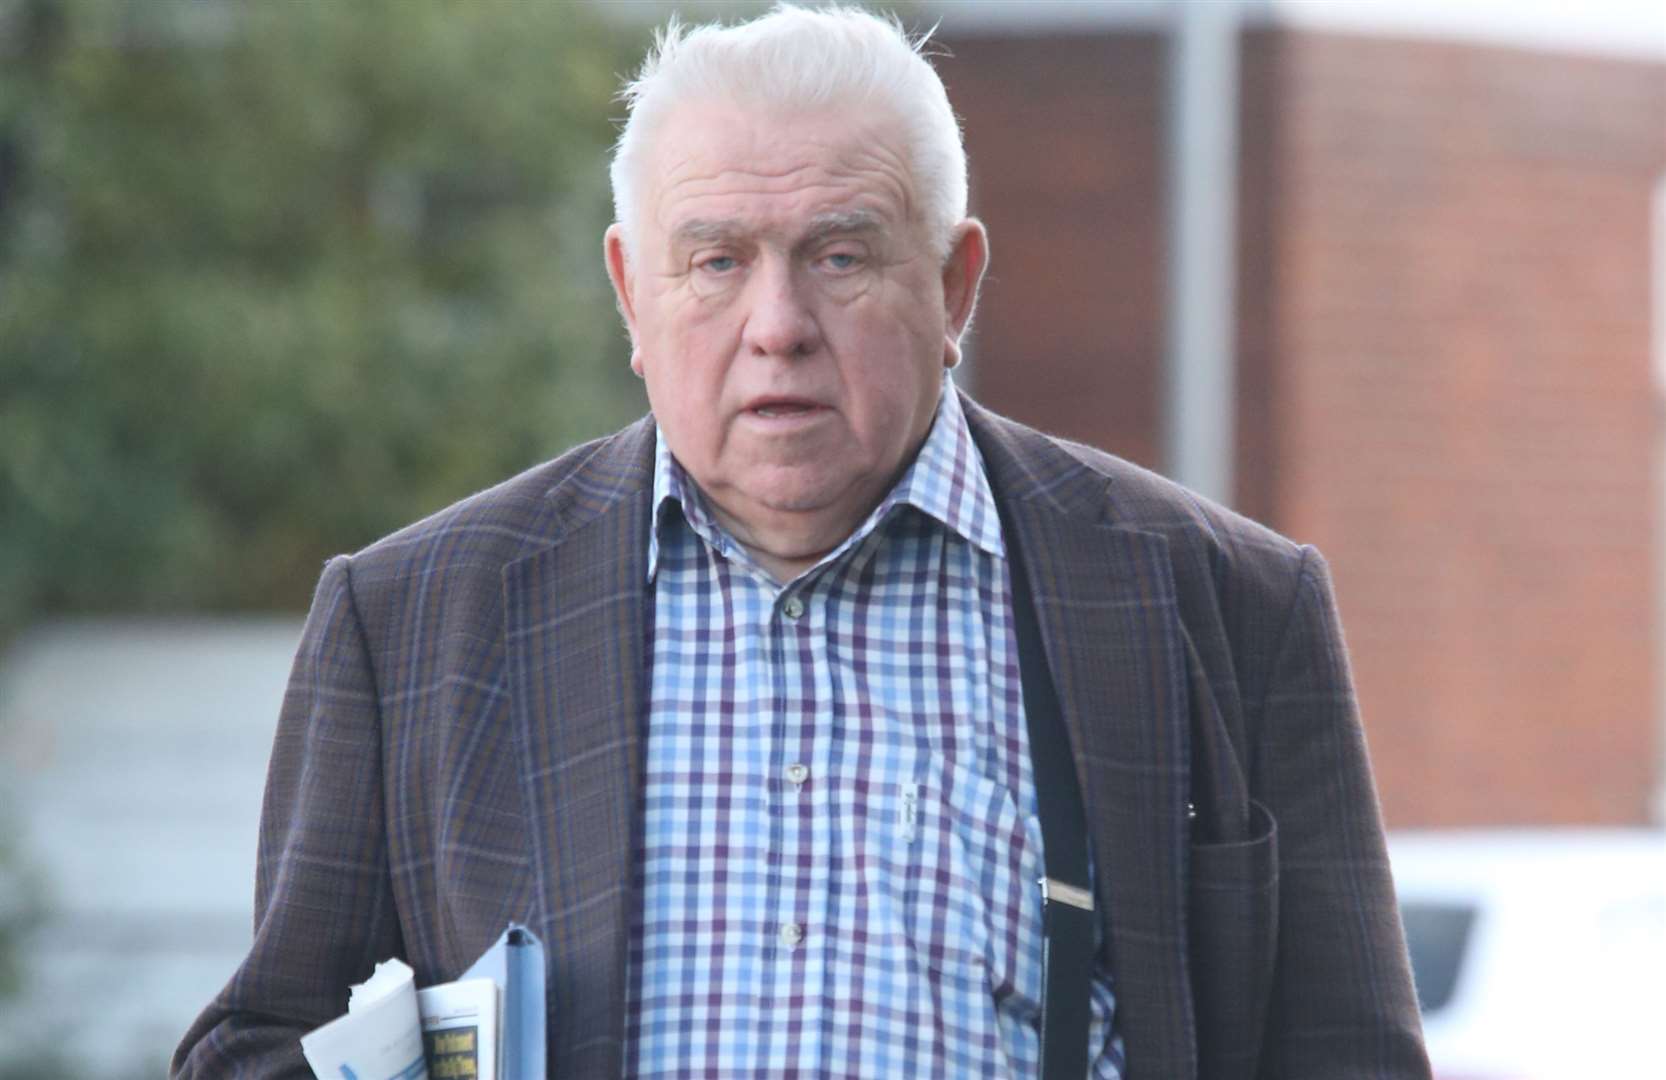 Fergus Wilson turns up at Maidstone Magistrates' Court. Picture: John Westhrop